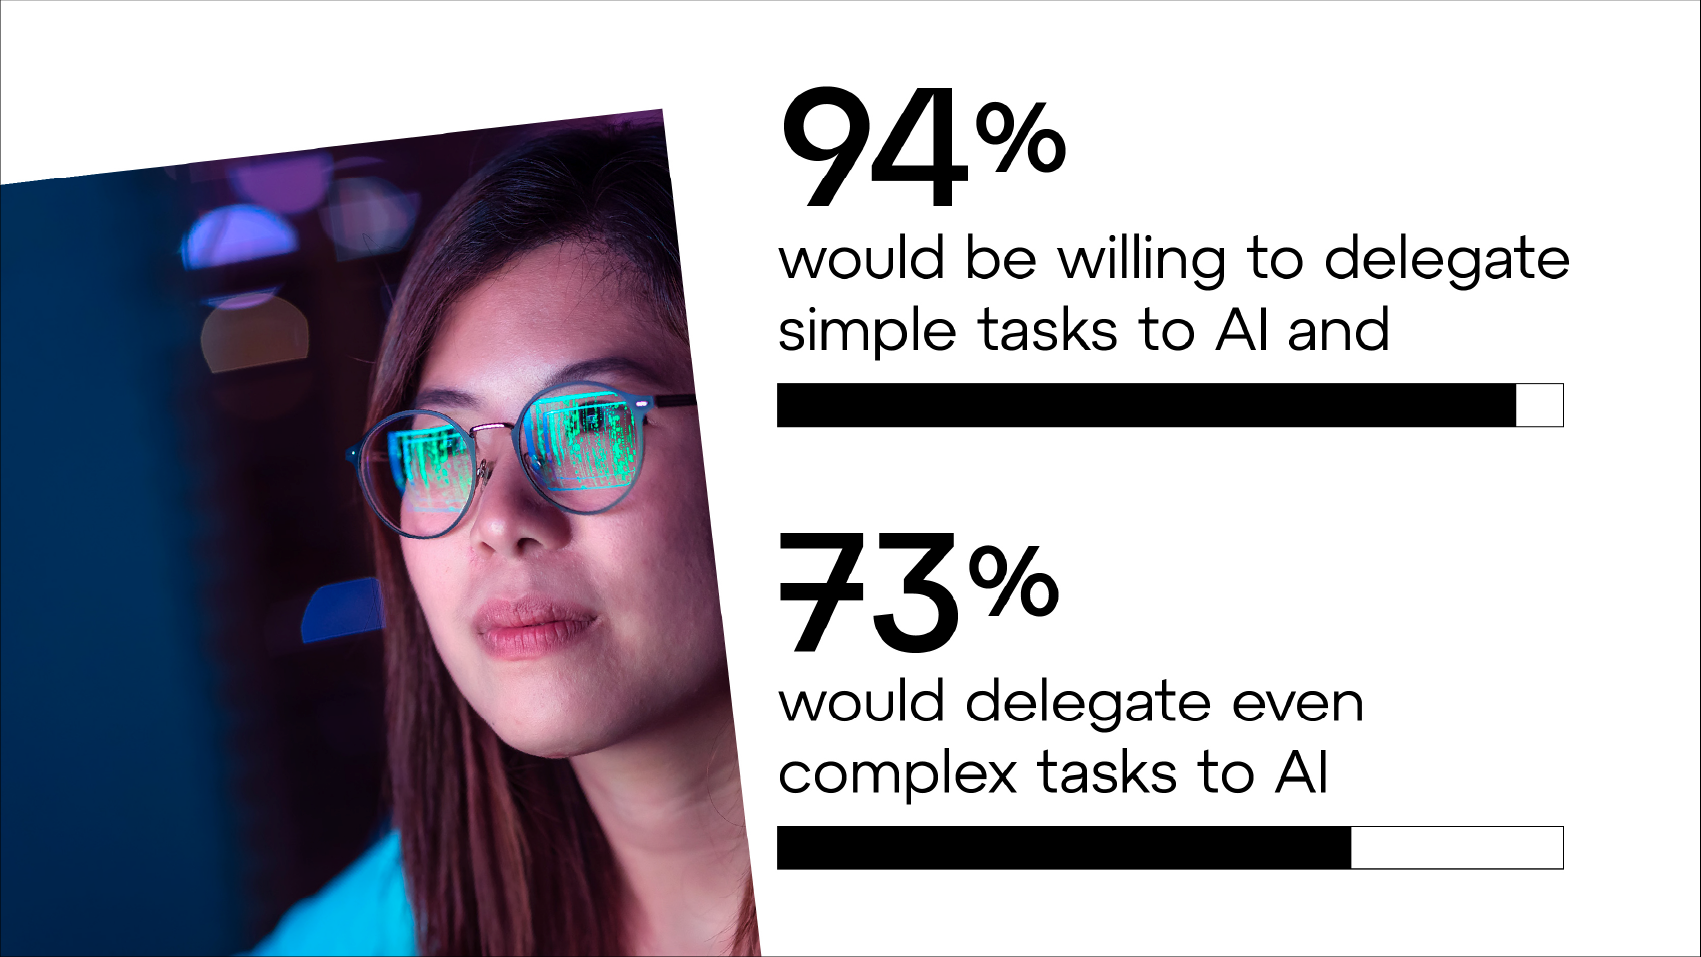 94% would be willing to delegate simple tasks to AI and 73% would delegate even complex tasks to AI.